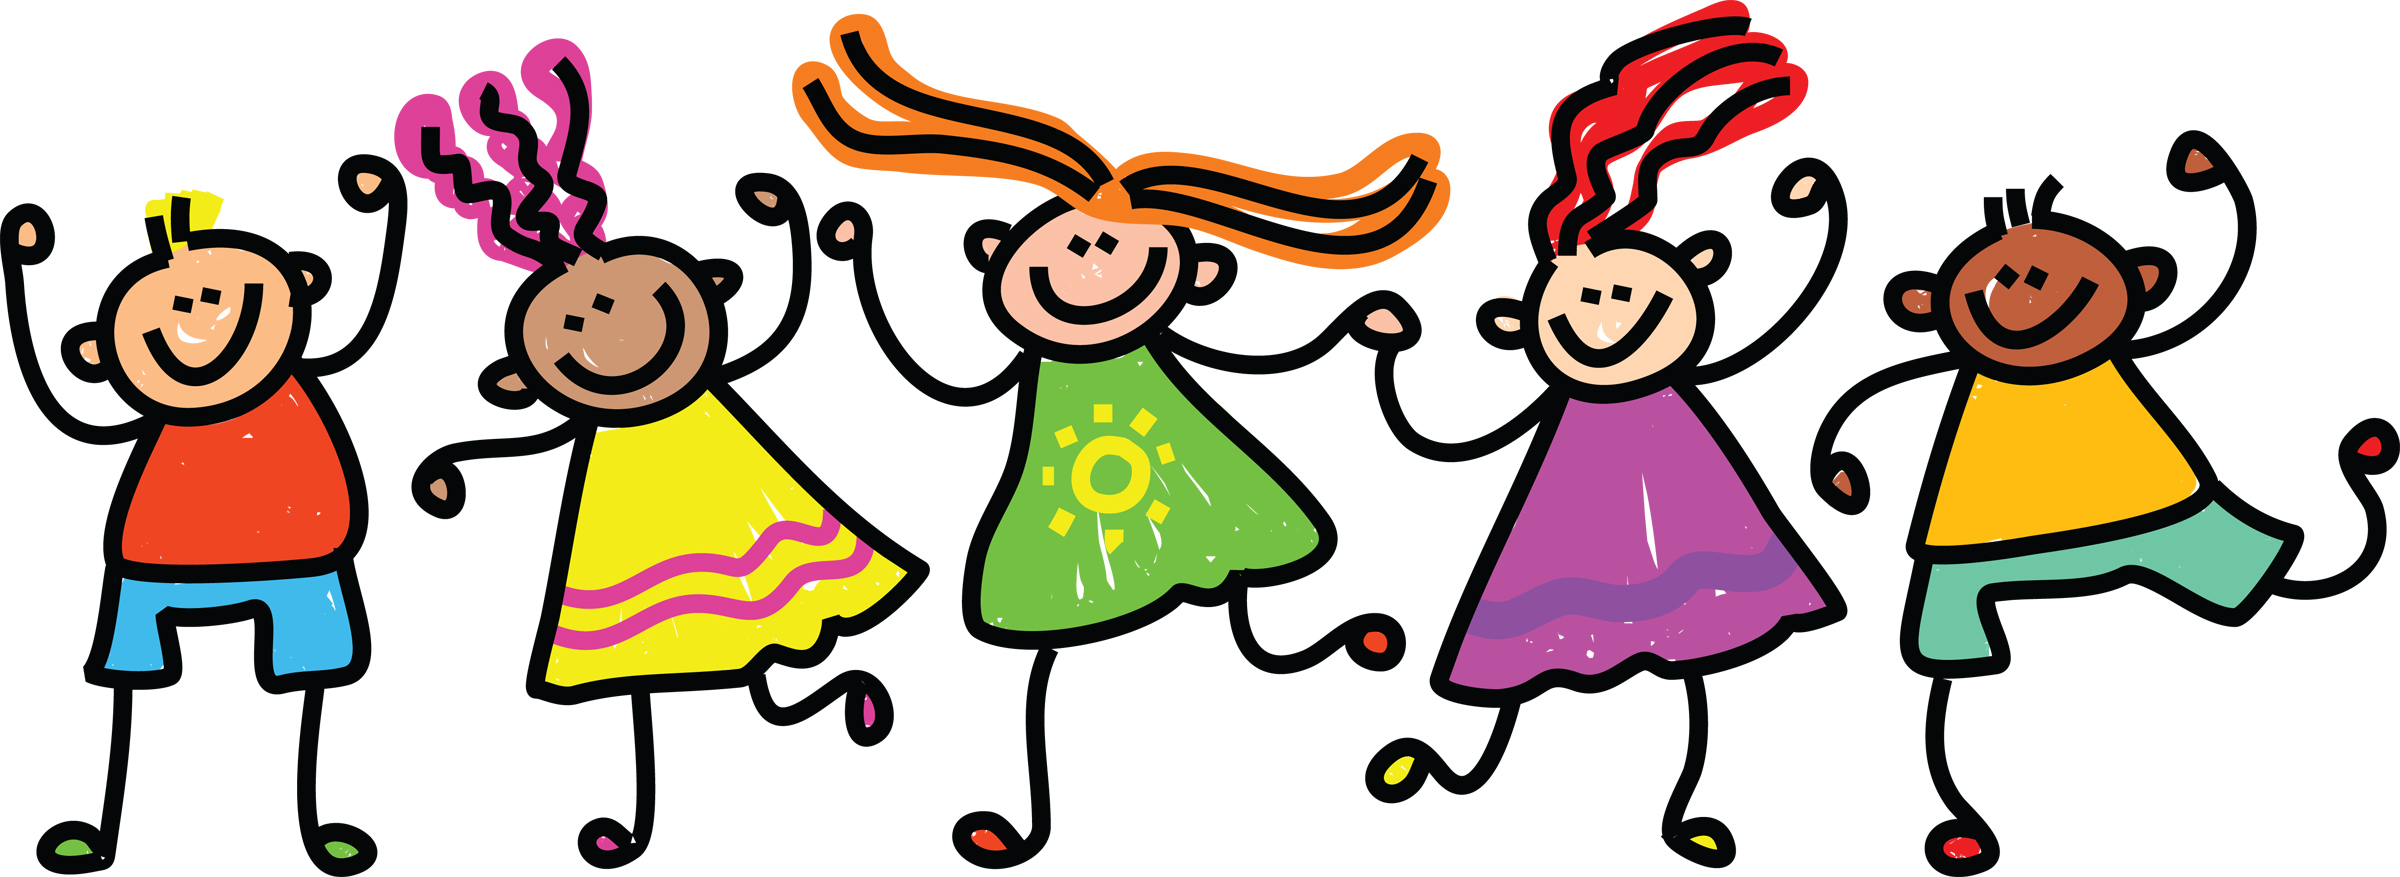 Dancing clip art pictures free clipart images 2